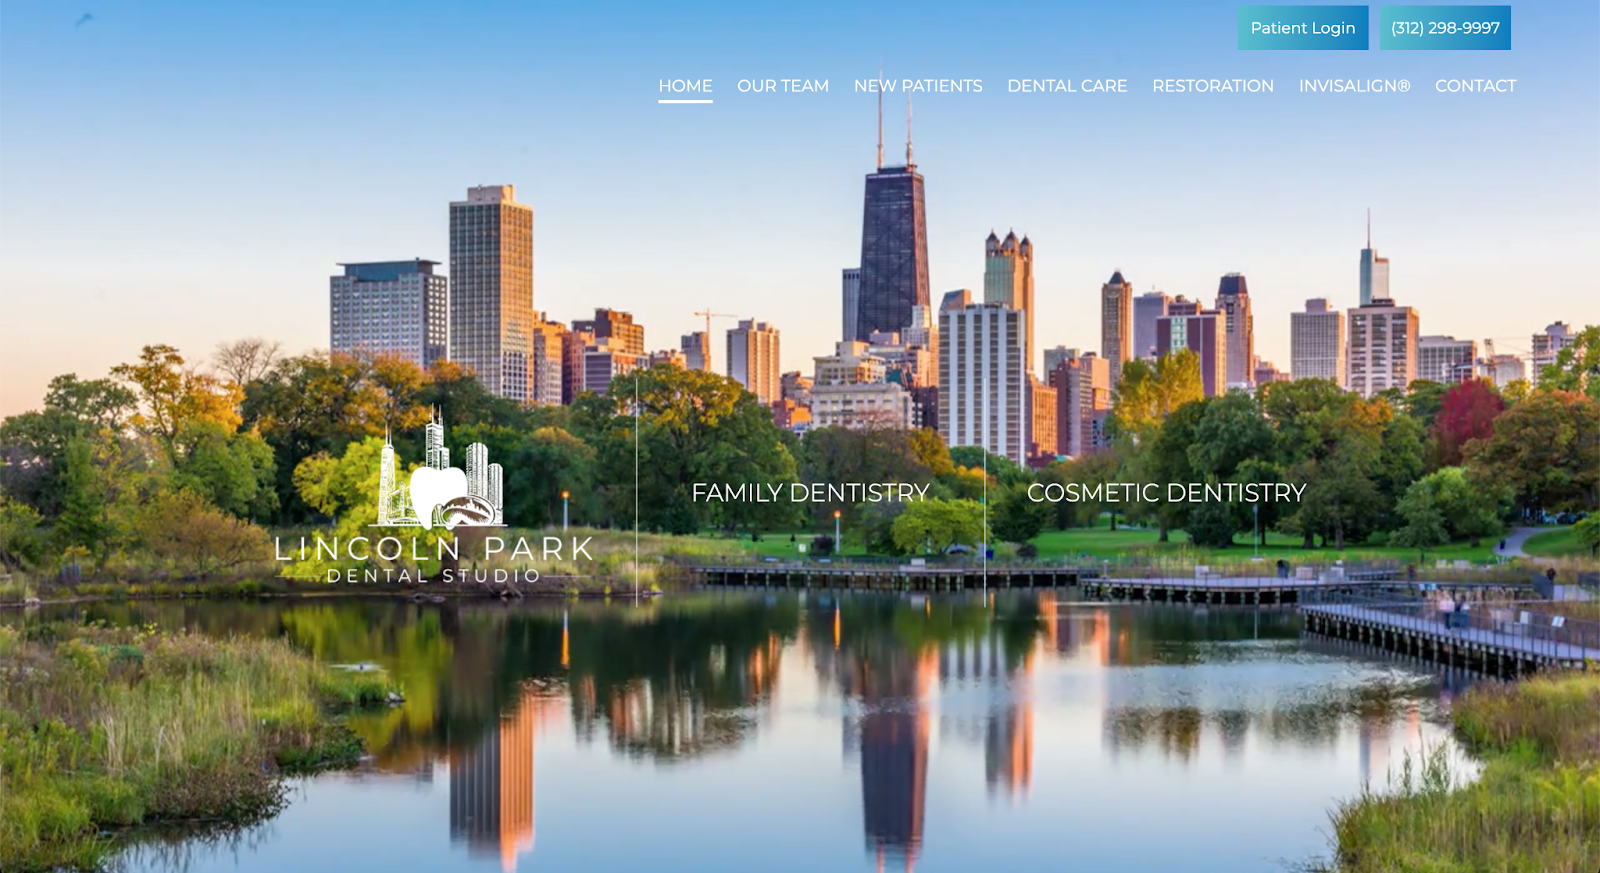 Check out Lincoln Park Dental Studio in our roundup of the best dental websites for inspiration